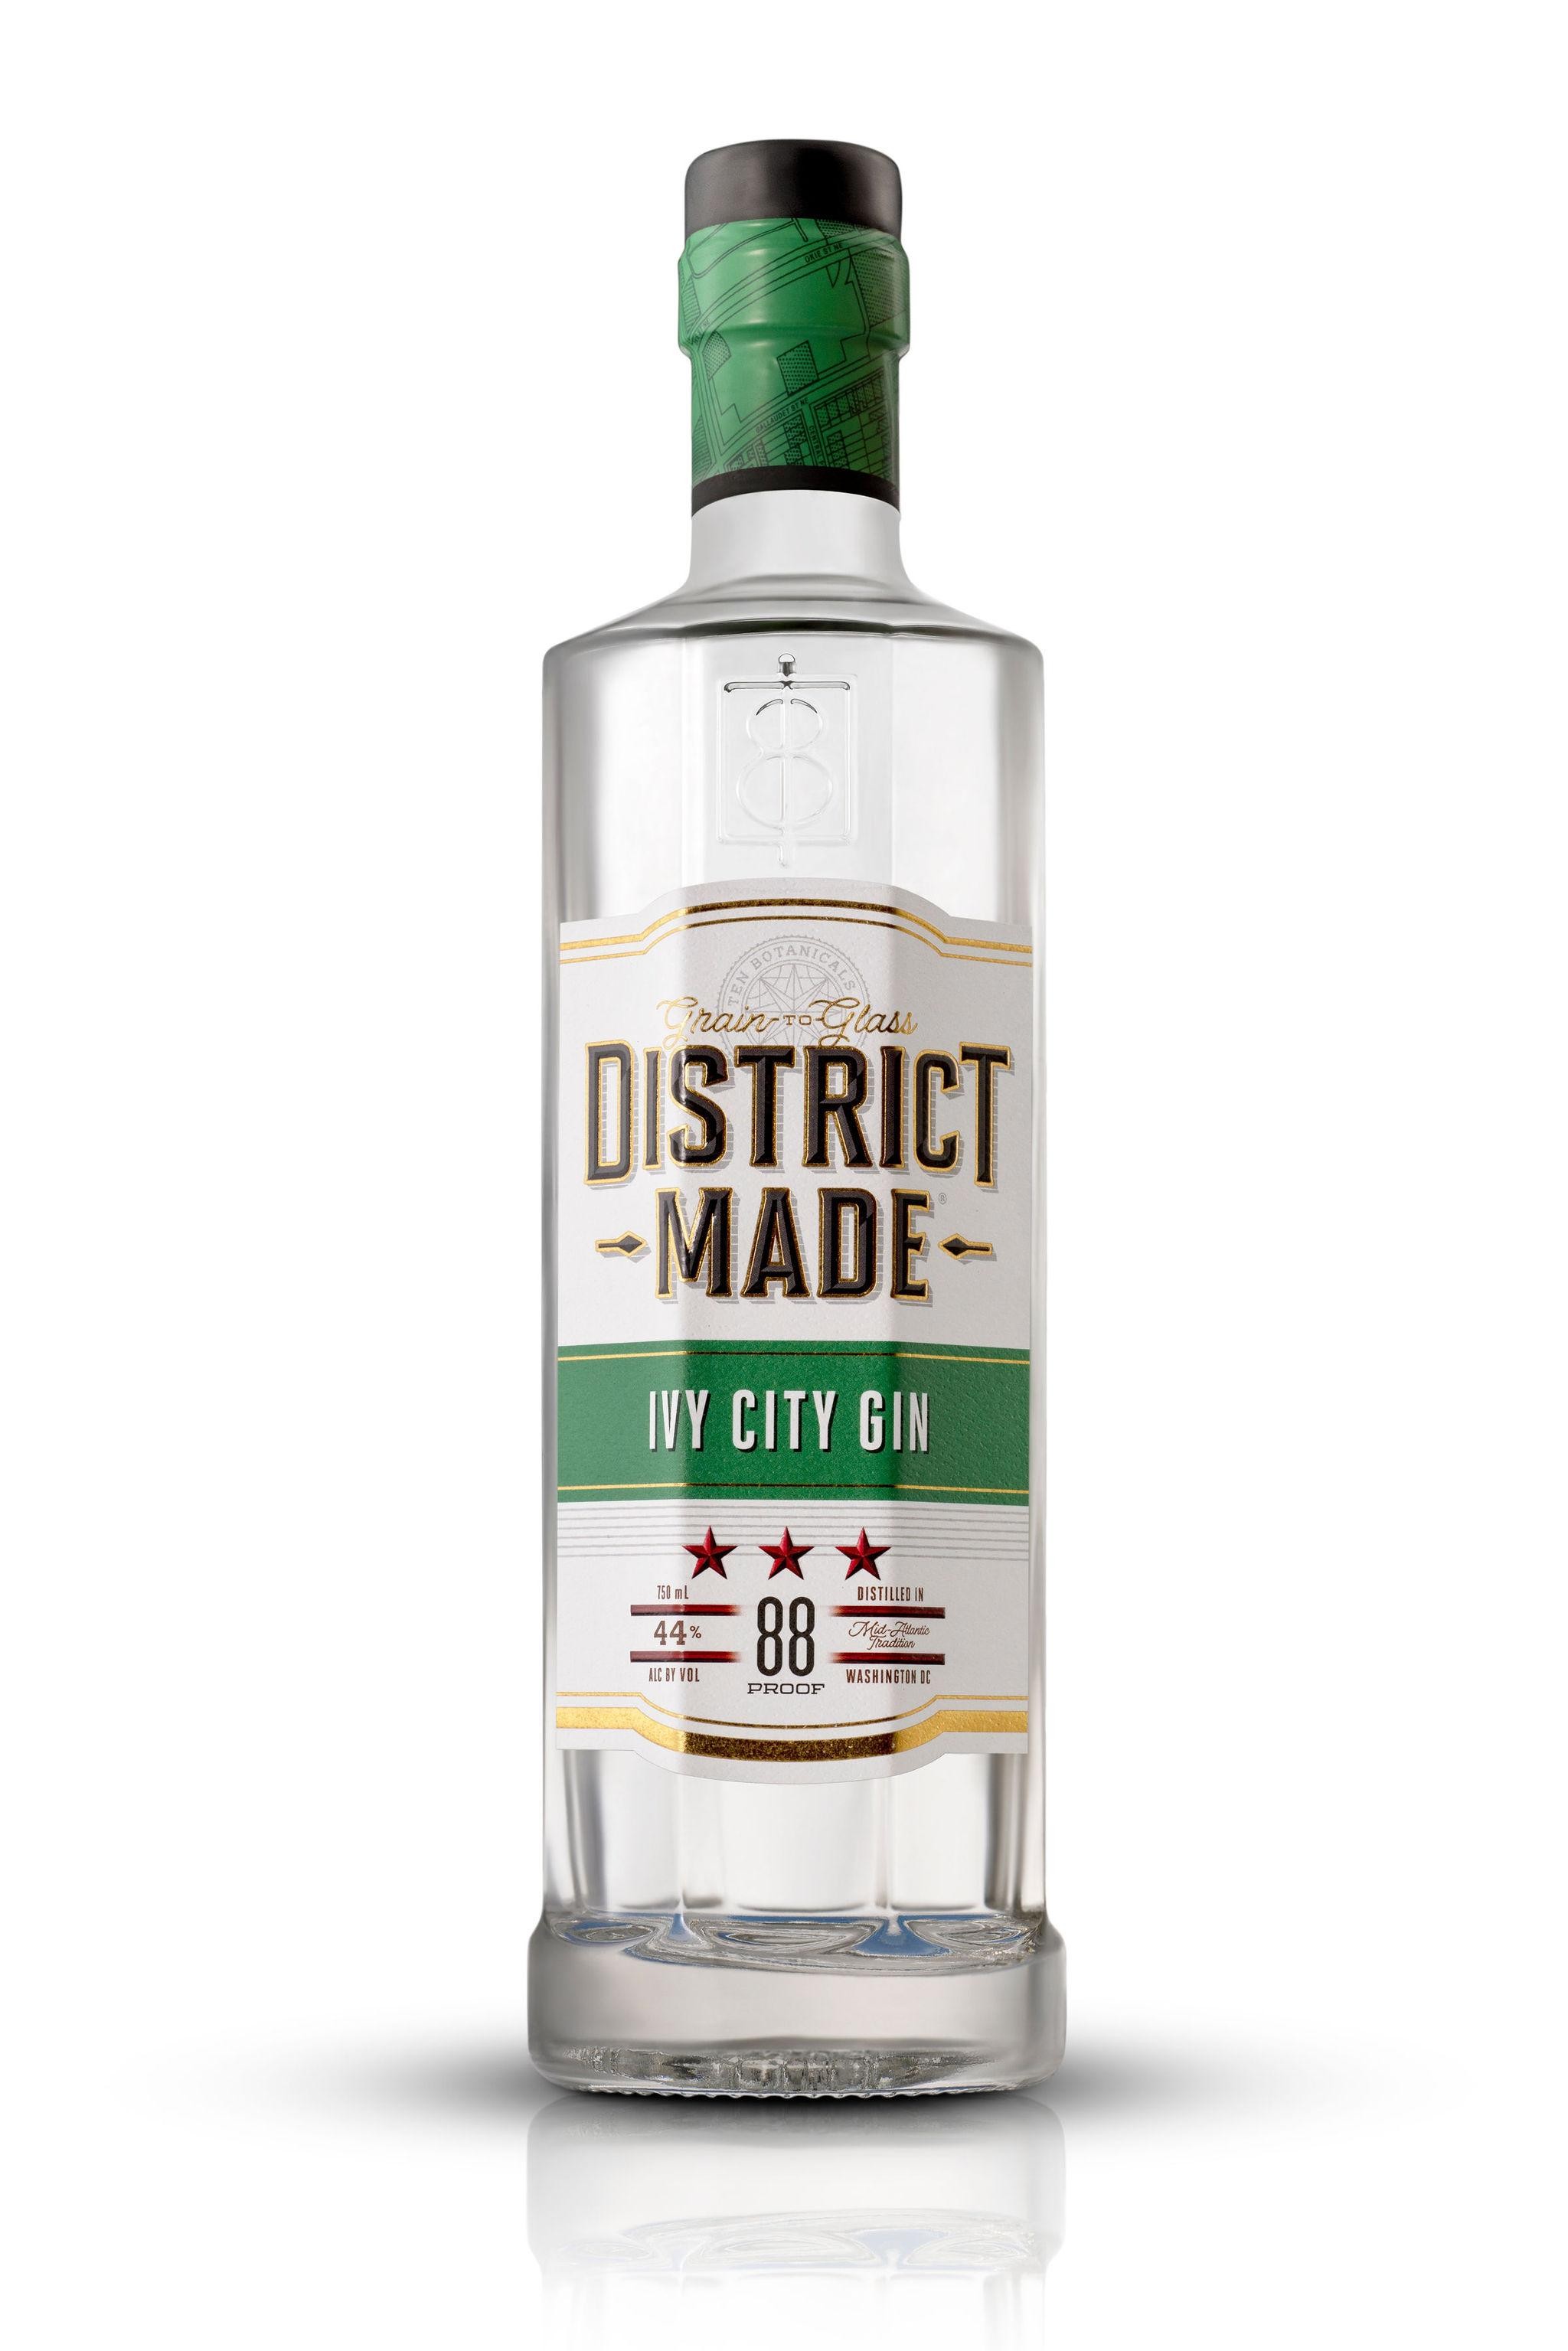 District Made Ivy City Gin